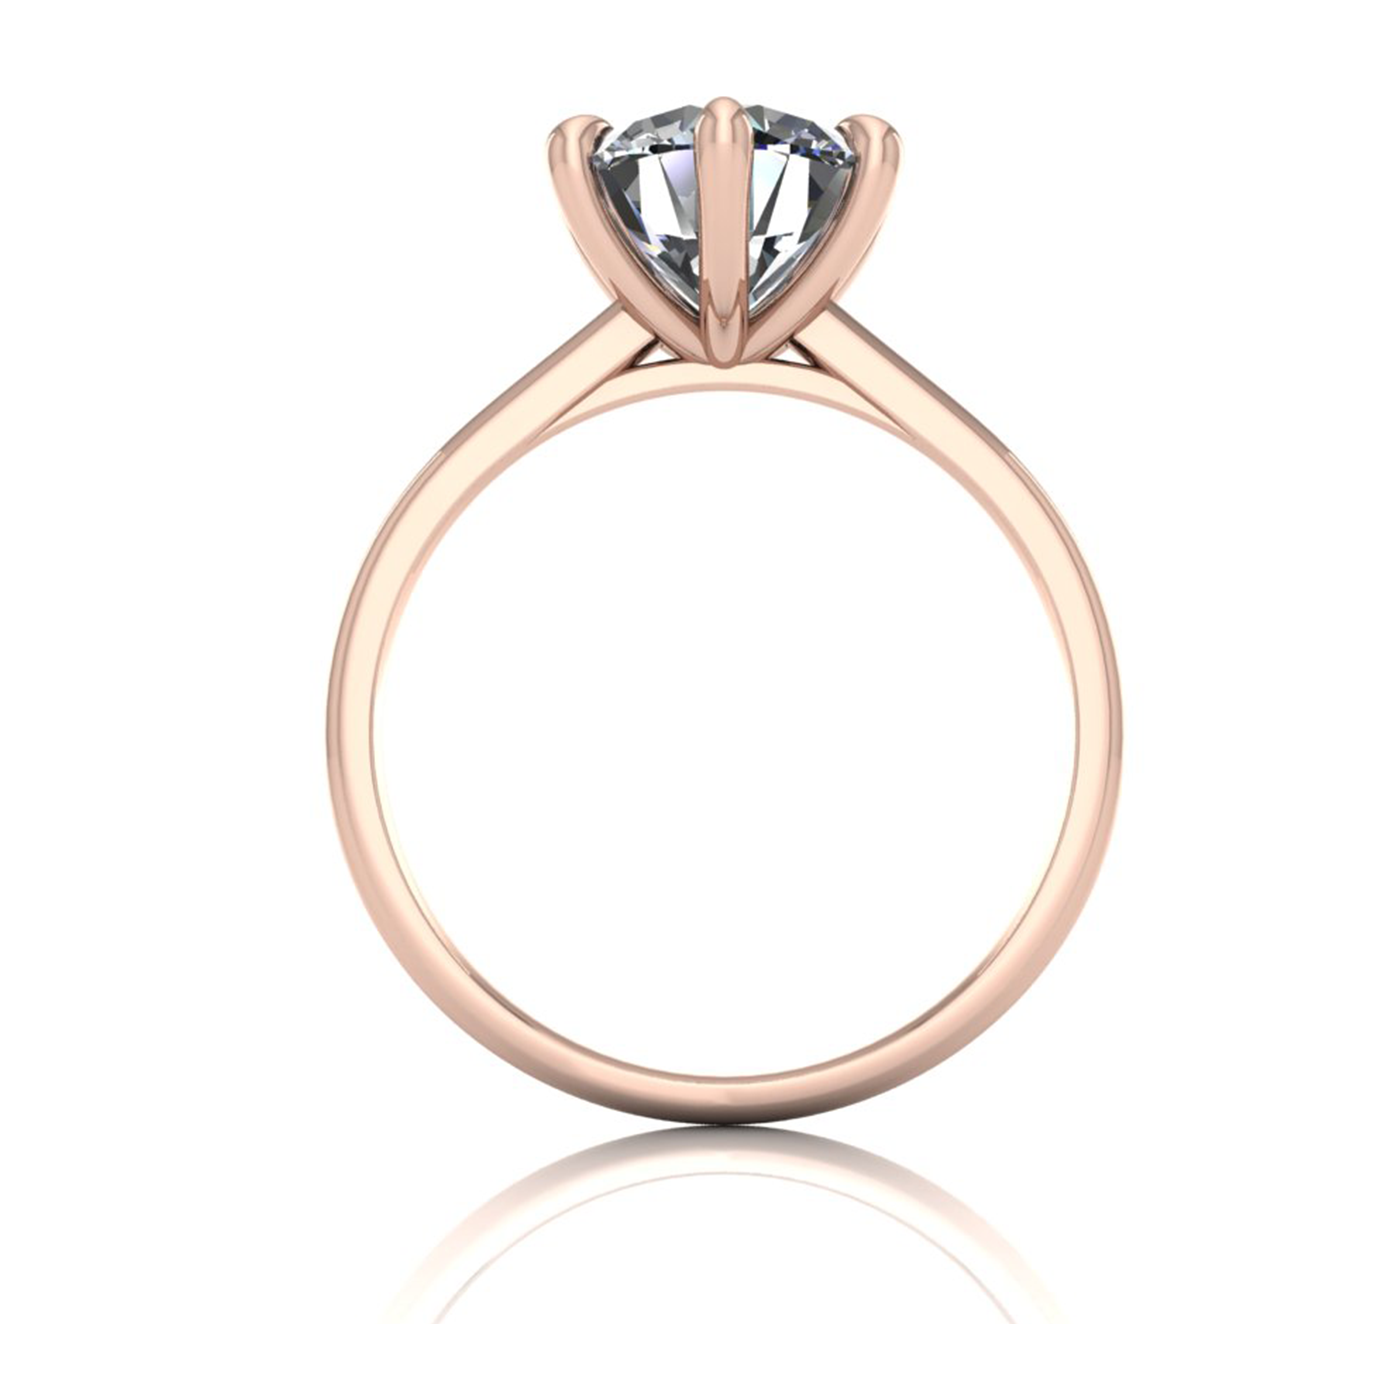 18k rose gold 2,00 ct 6 prongs solitaire round cut diamond engagement ring with whisper thin band